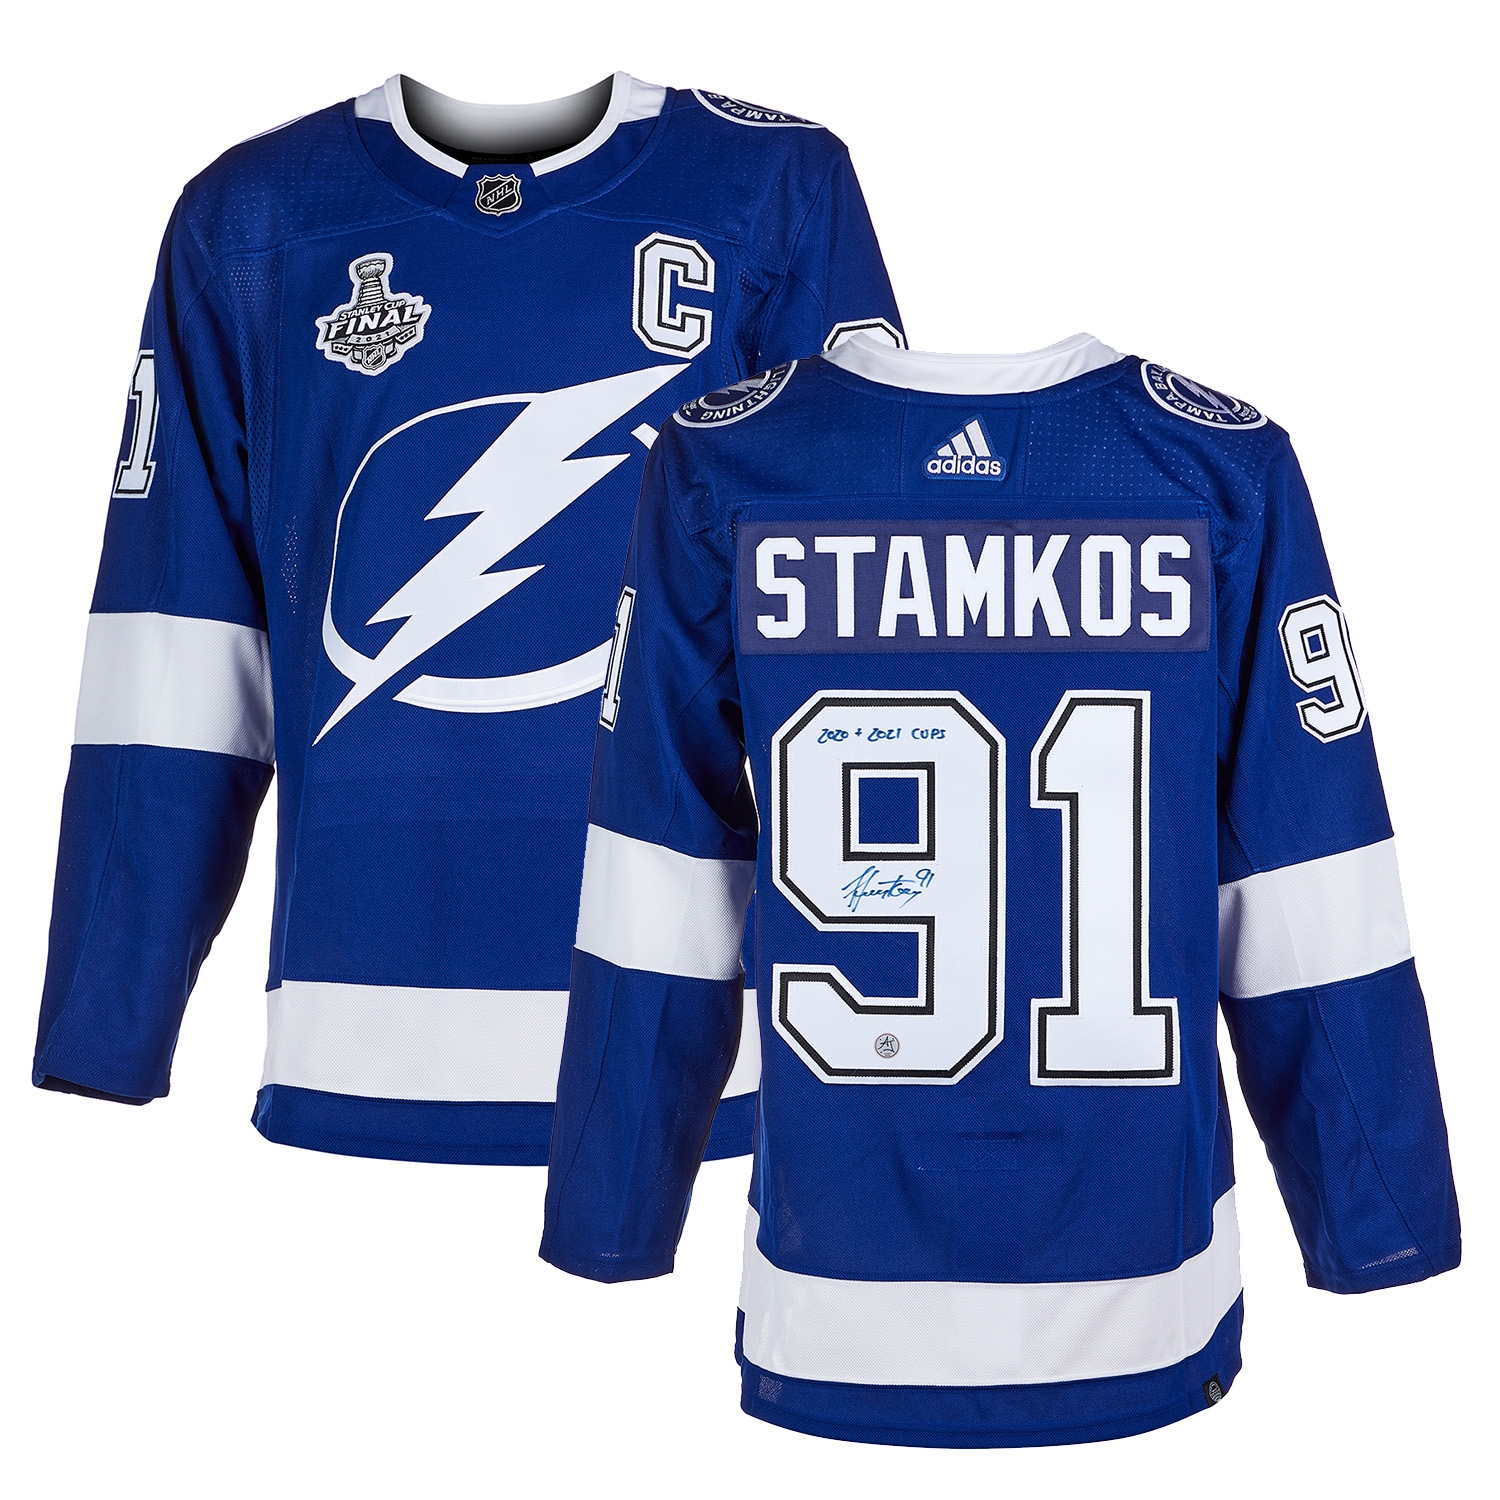 Steven Stamkos Signed Tampa Bay Lightning 2021 Stanley Cup adidas Jersey